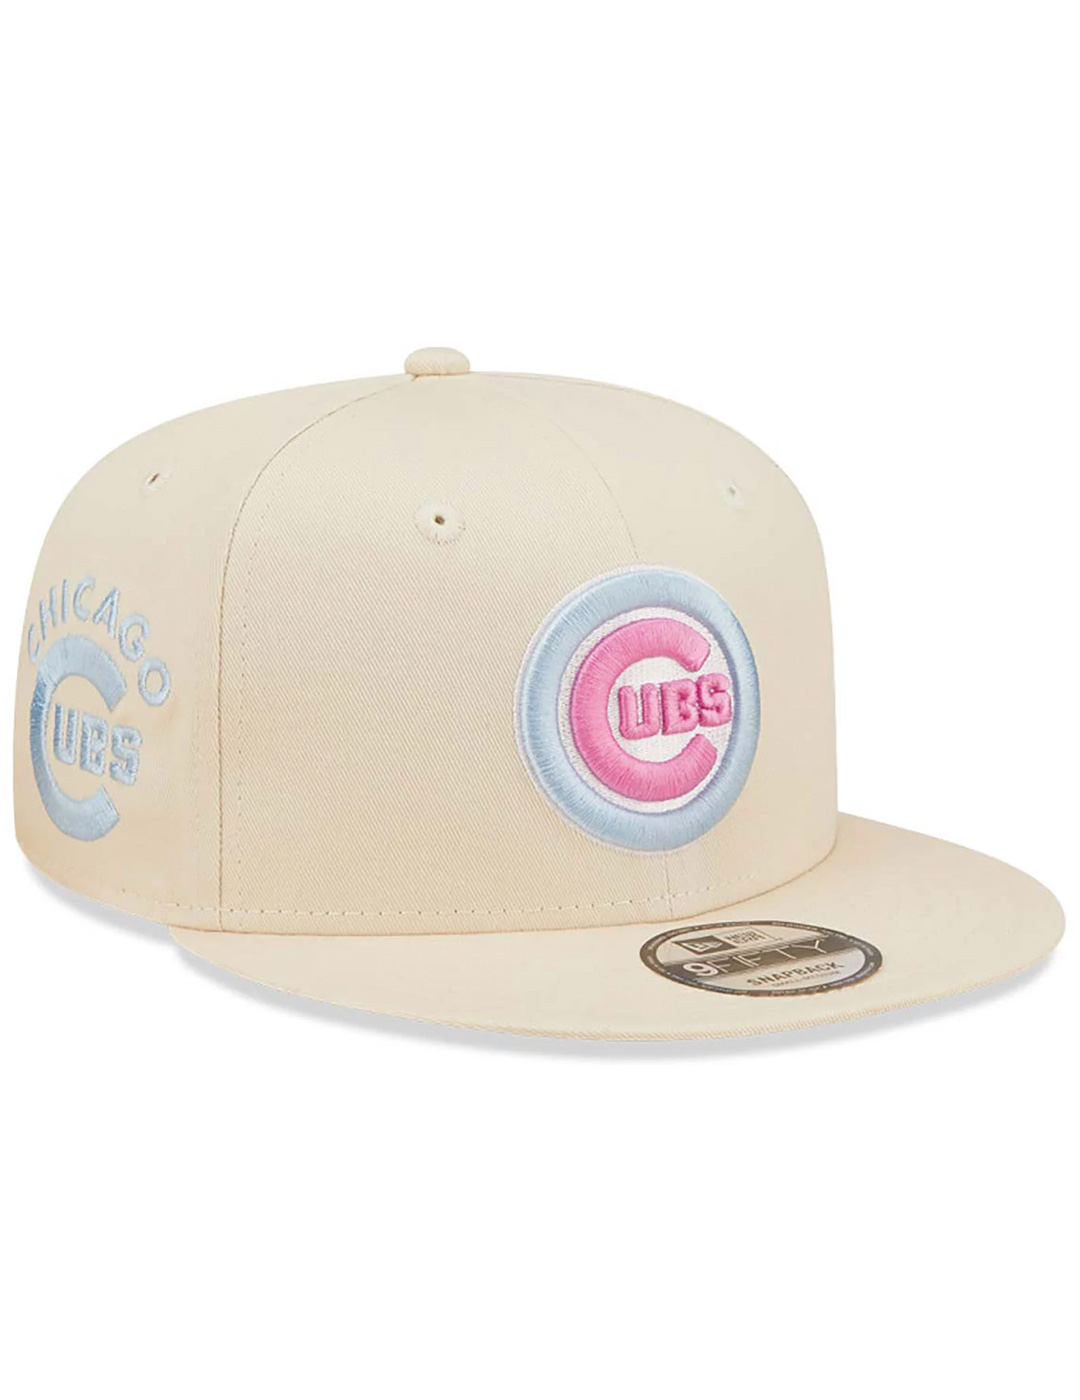 gorra newera visera plana MUJER PASTEL PATCH 9FIFTY CHICAGO CUBS  beige